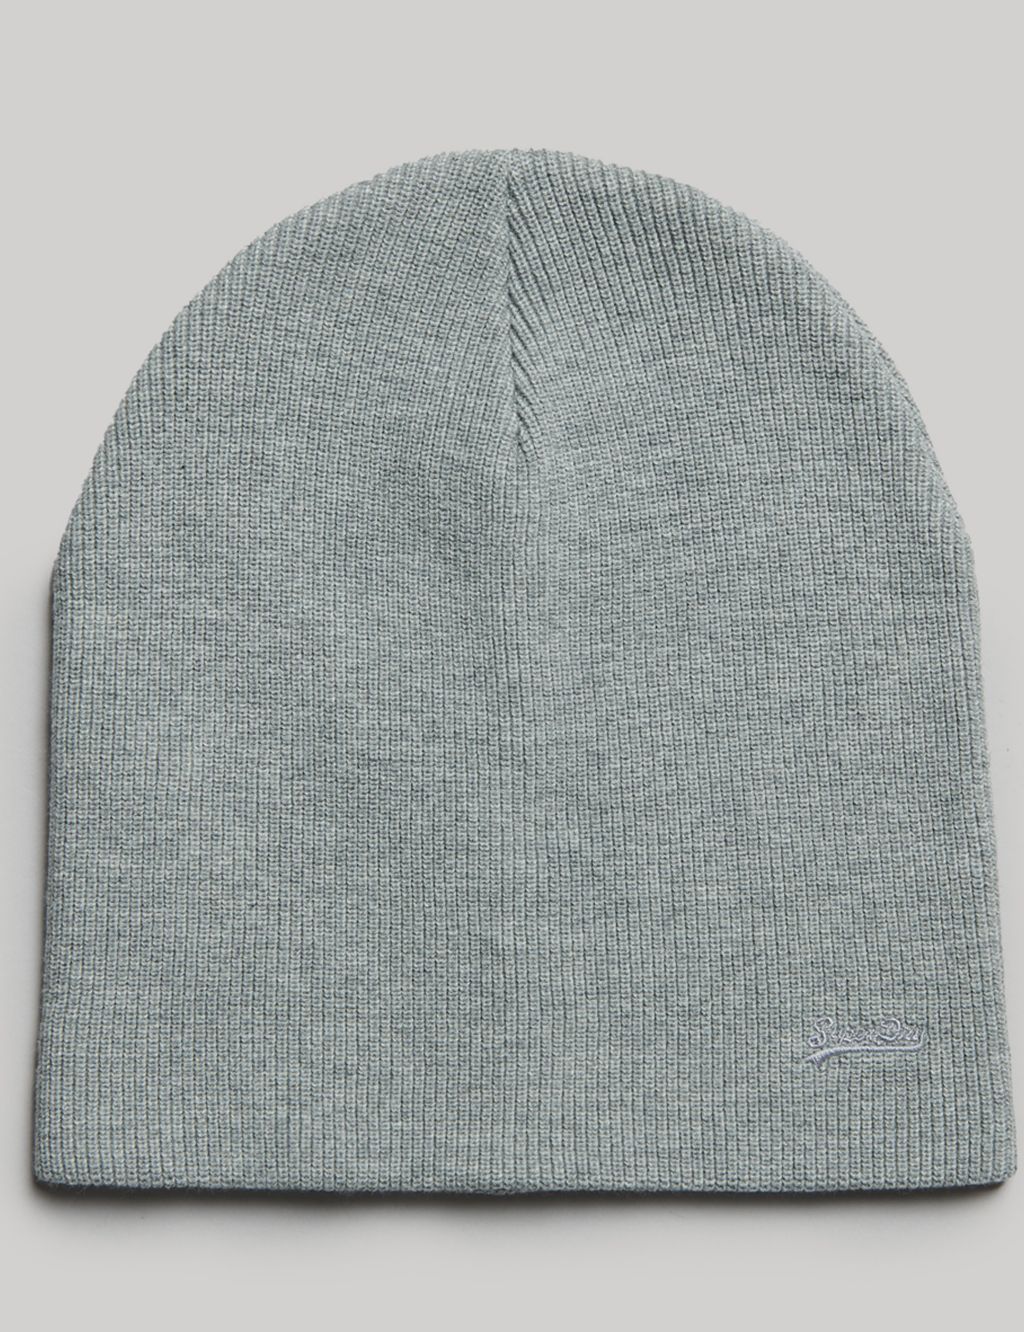 Pure Cotton Knitted Beanie Hat image 1